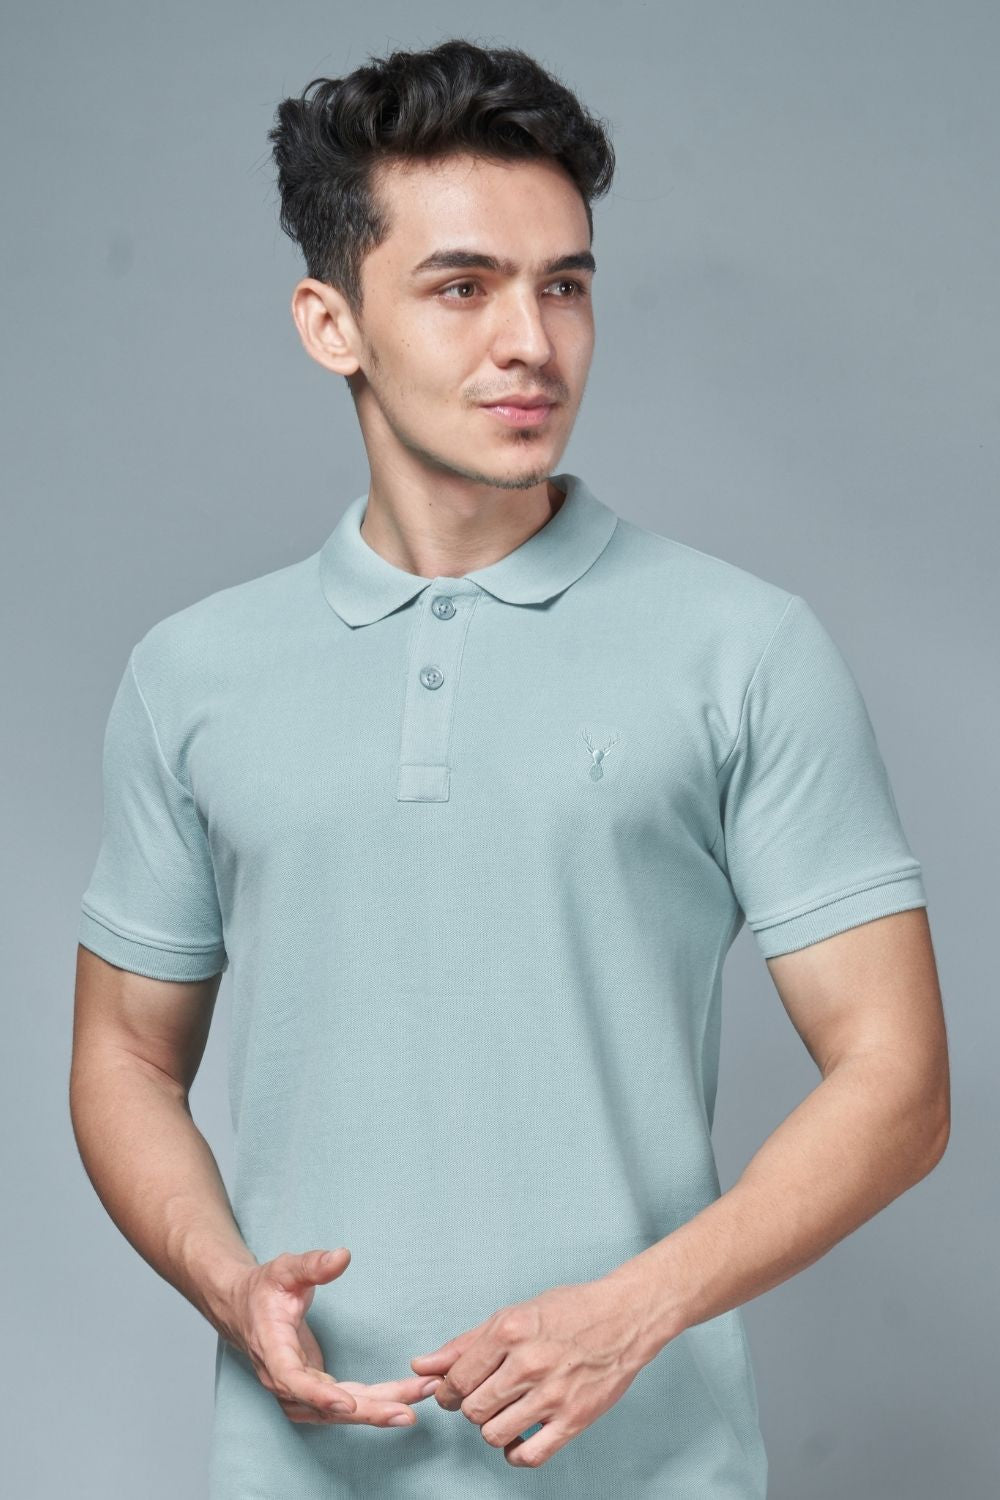 Sky light colored, identity Polo T-shirts for men with collar and half sleeves, front view.